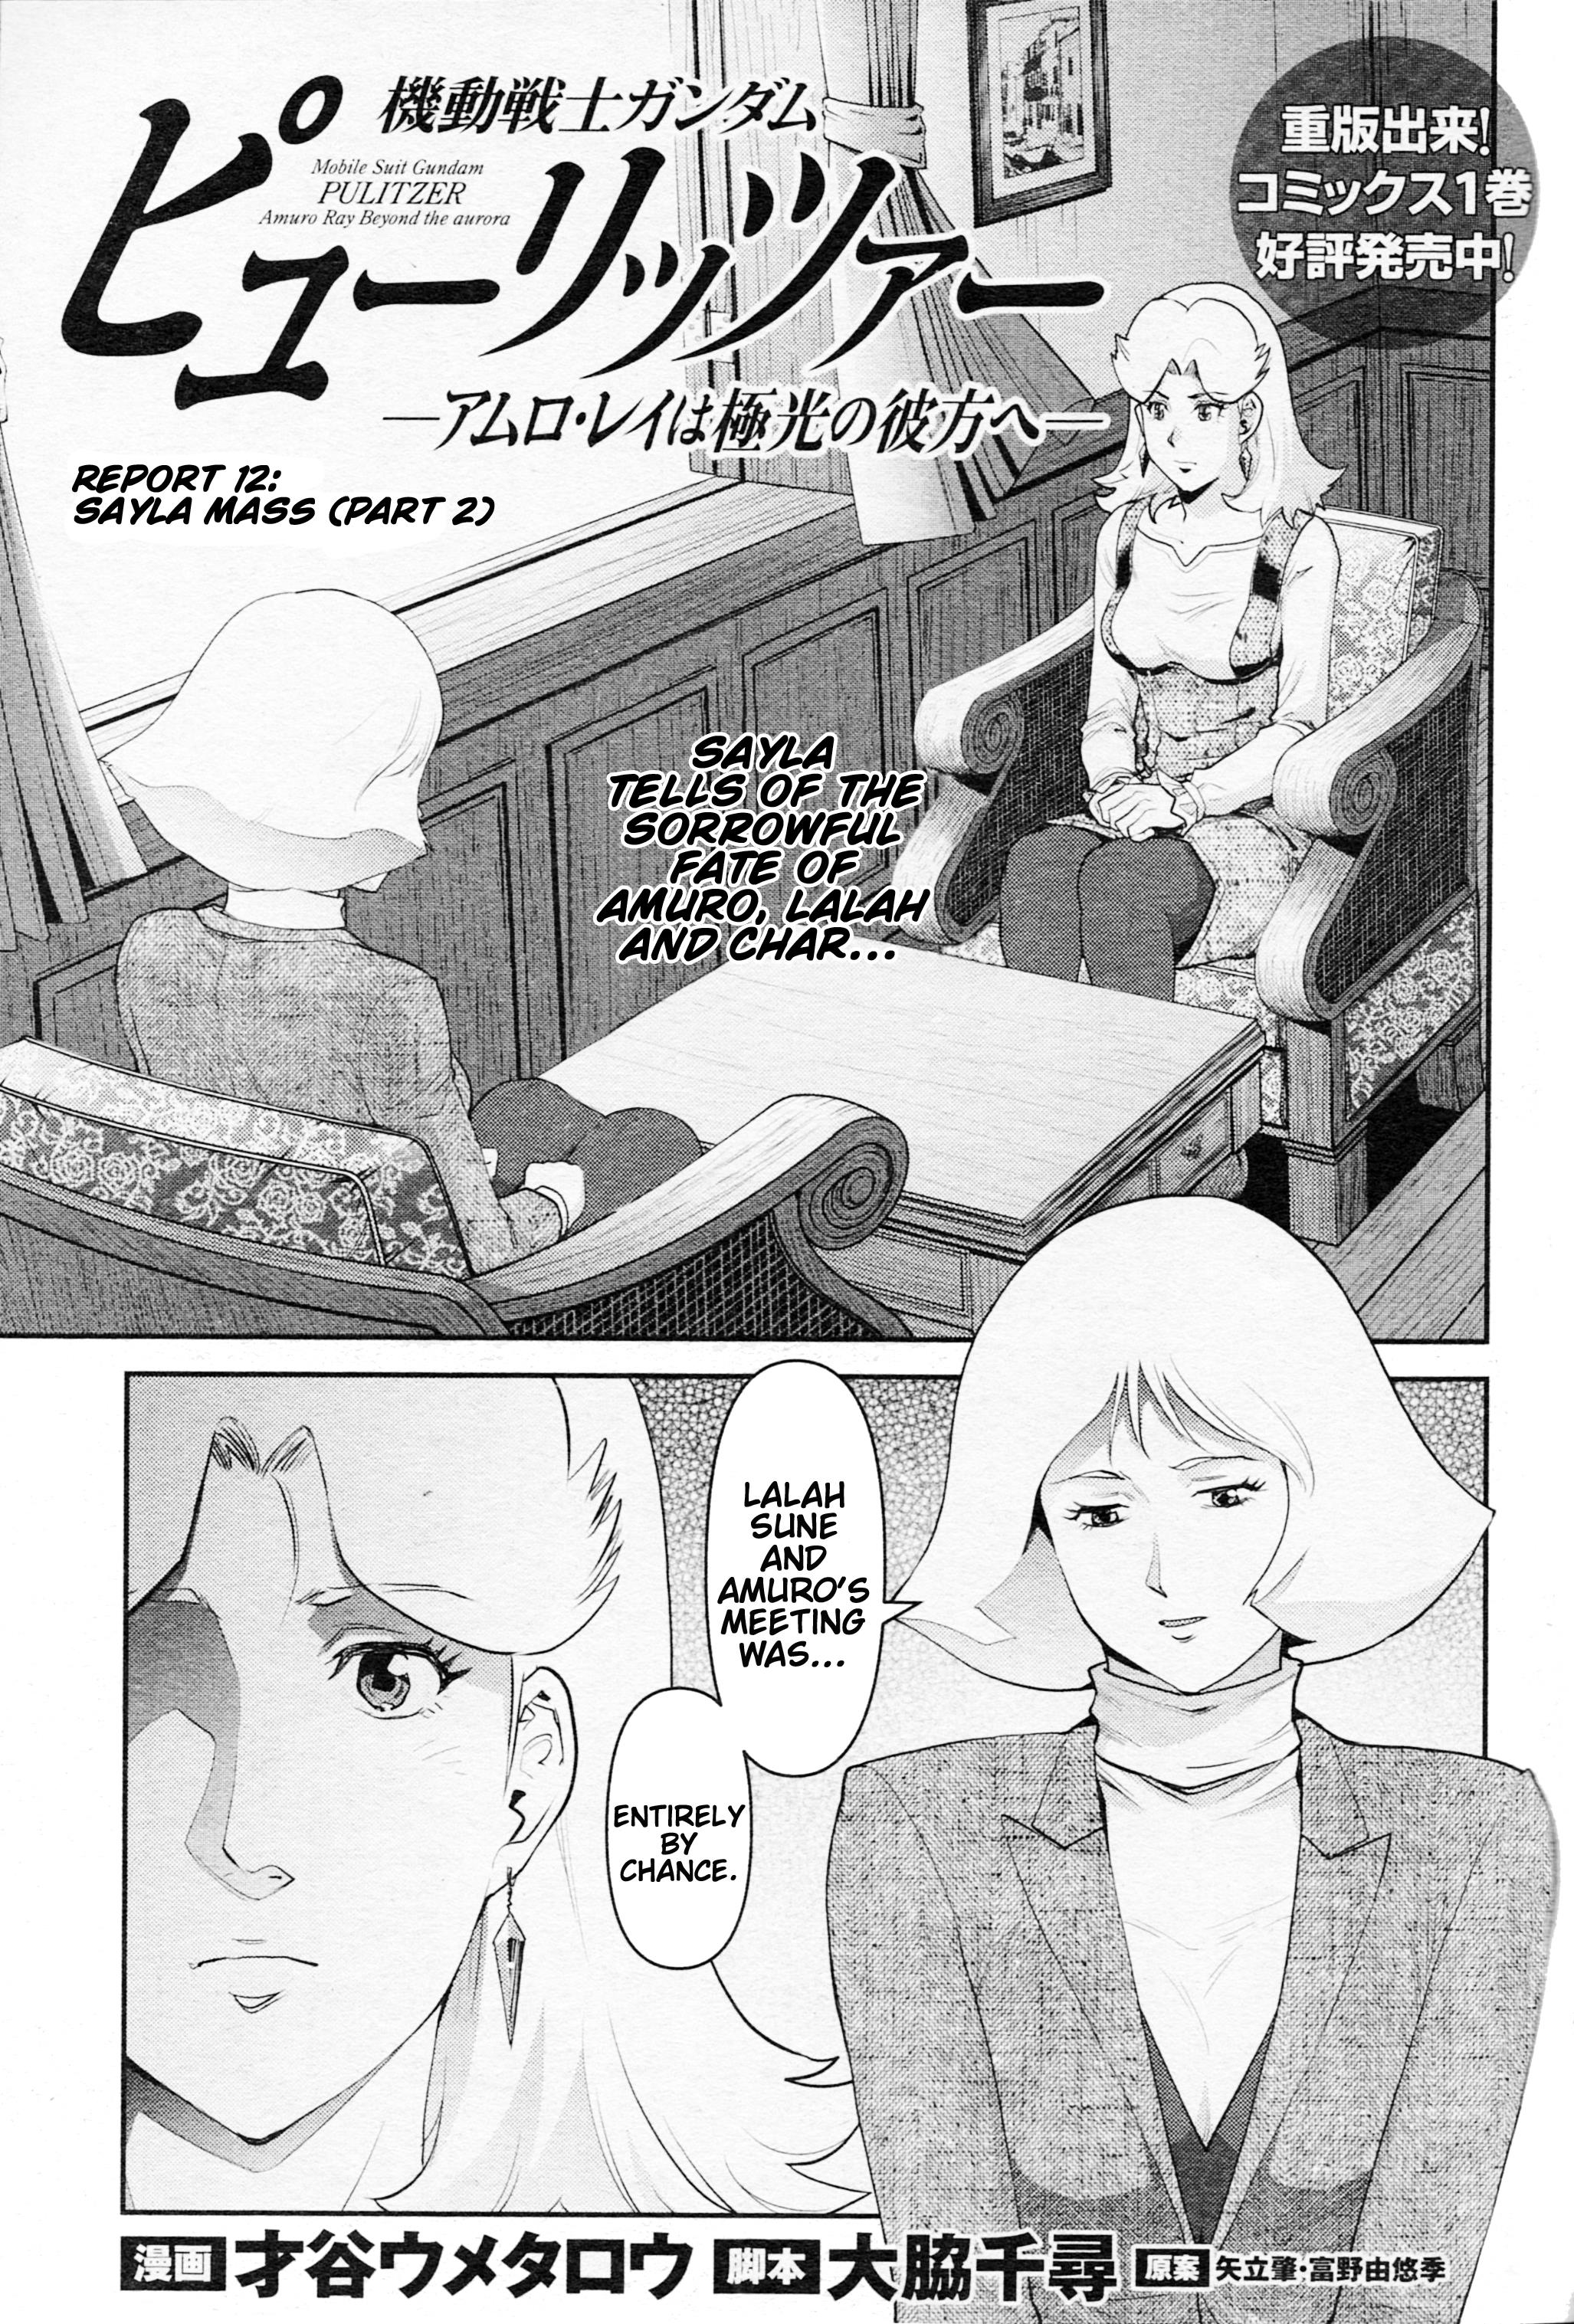 Mobile Suit Gundam Pulitzer - Amuro Ray Beyond The Aurora Vol.2 Chapter 13: Report 13: Sayla Mass (Part 2) - Picture 1